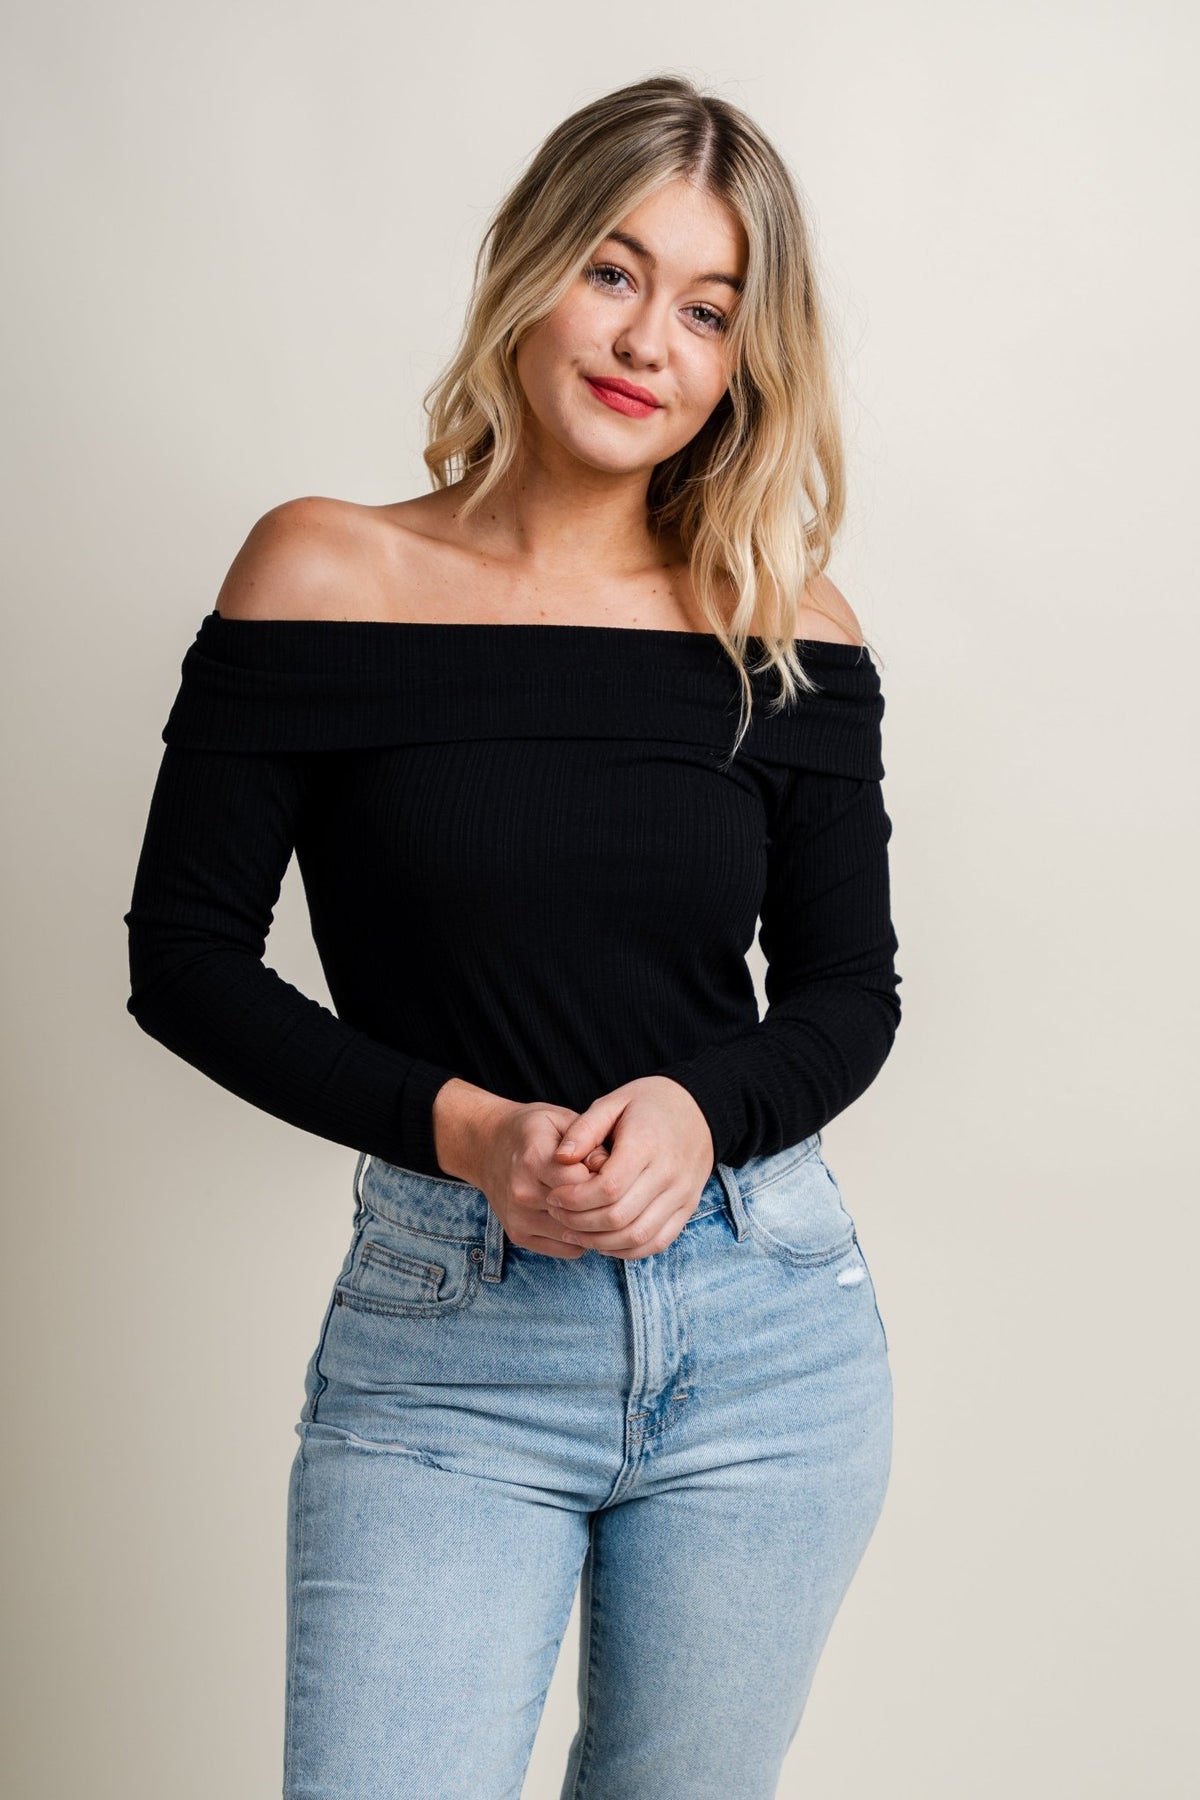 Z Supply Elena off shoulder top black - Z Supply Top - Z Supply Tops, Dresses, Tanks, Tees, Cardigans, Joggers and Loungewear at Lush Fashion Lounge